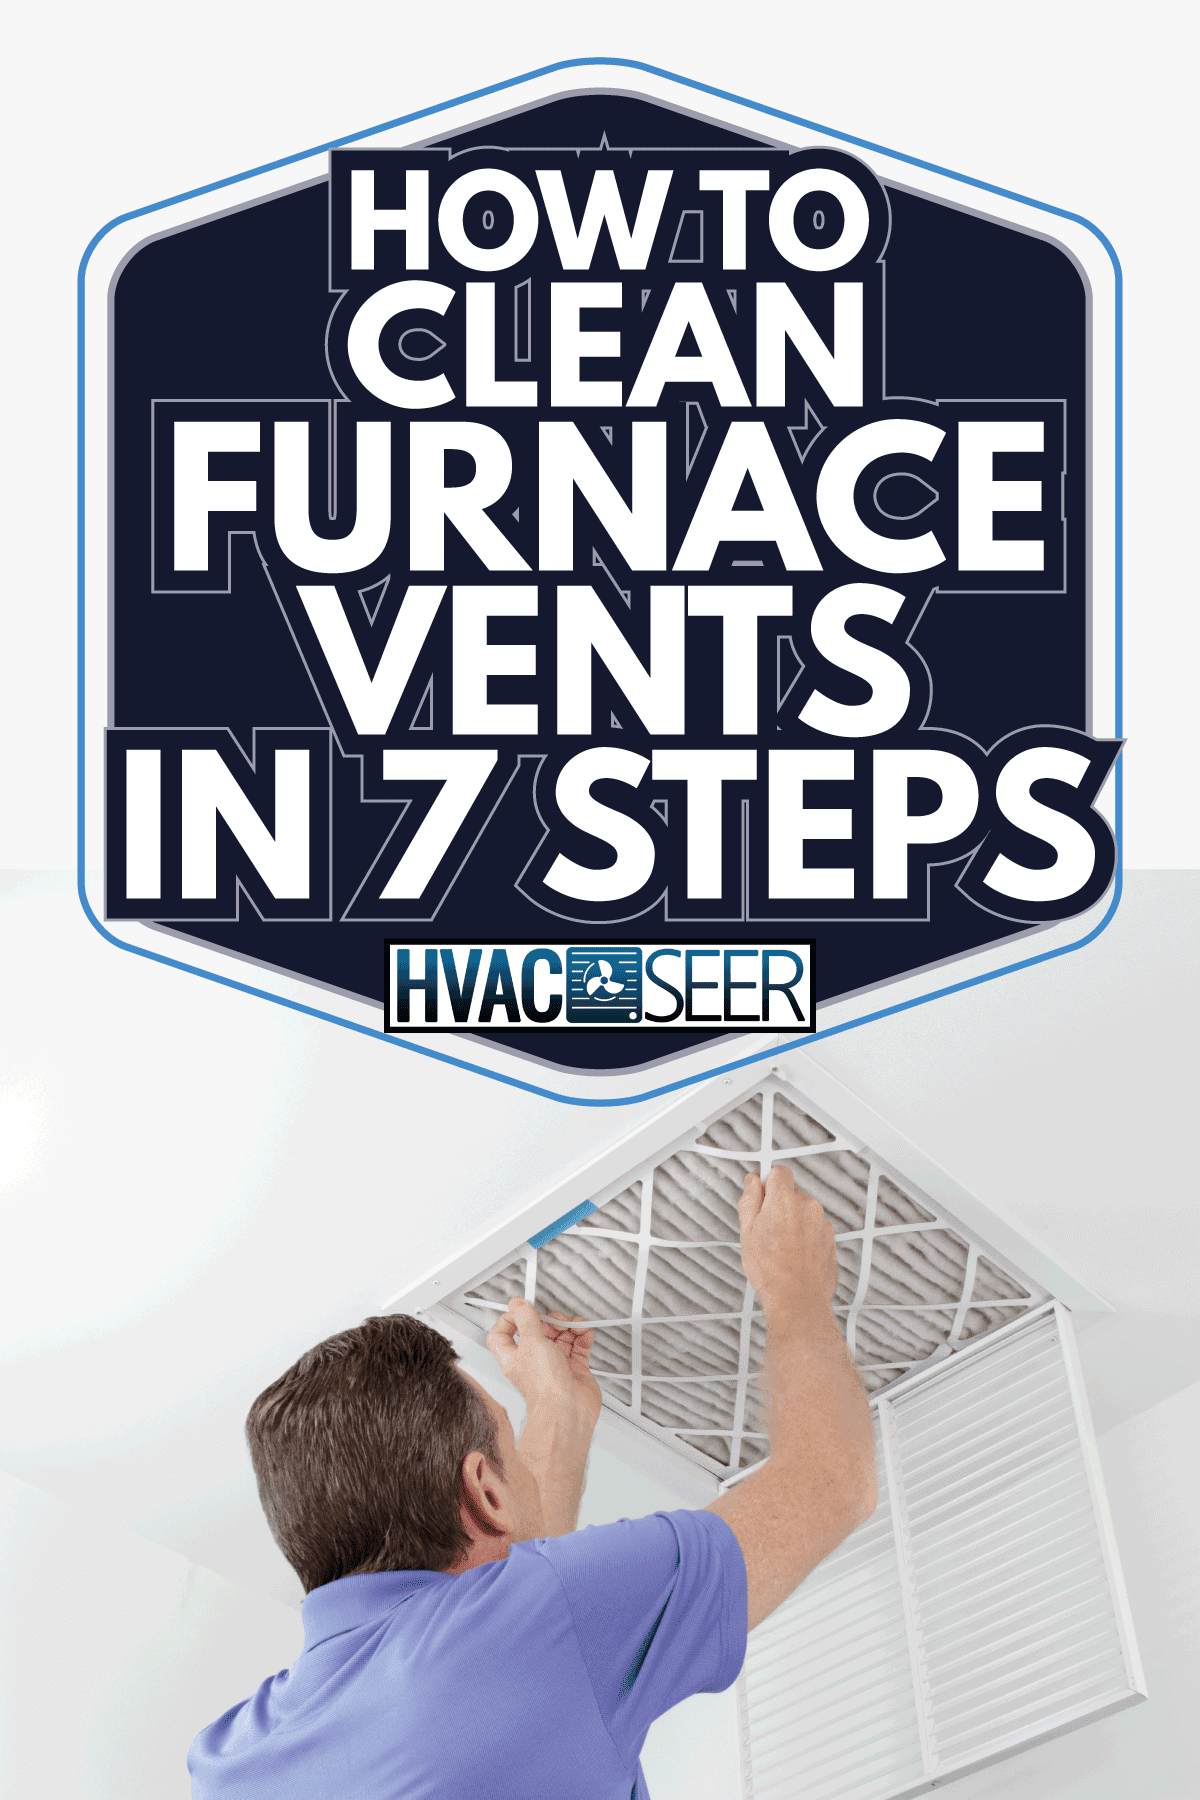 Person Removing Ceiling Air Filter. How To Clean Furnace Vents In 7 Steps